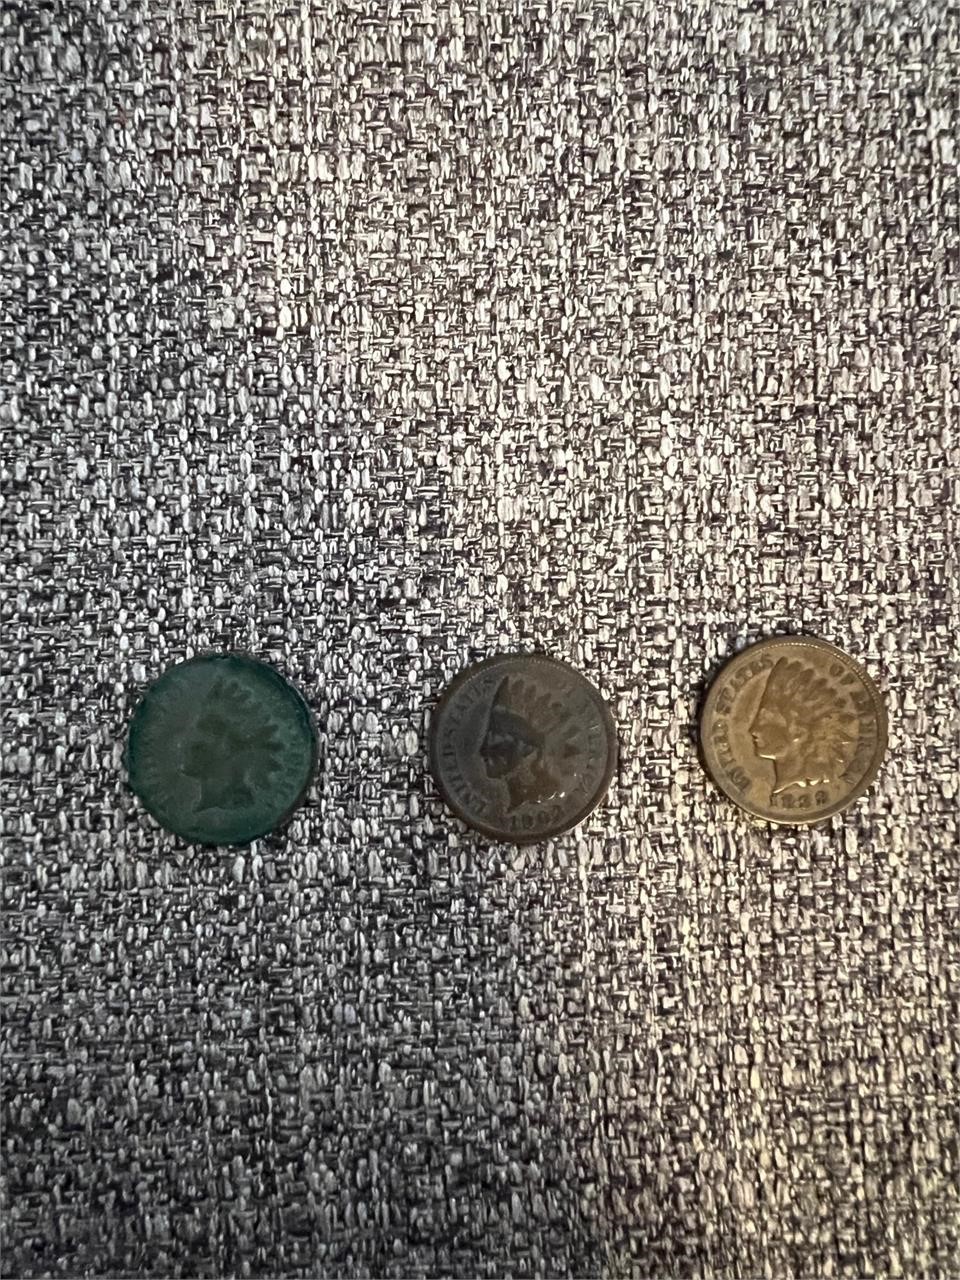 Indian Head and Wheat Pennies